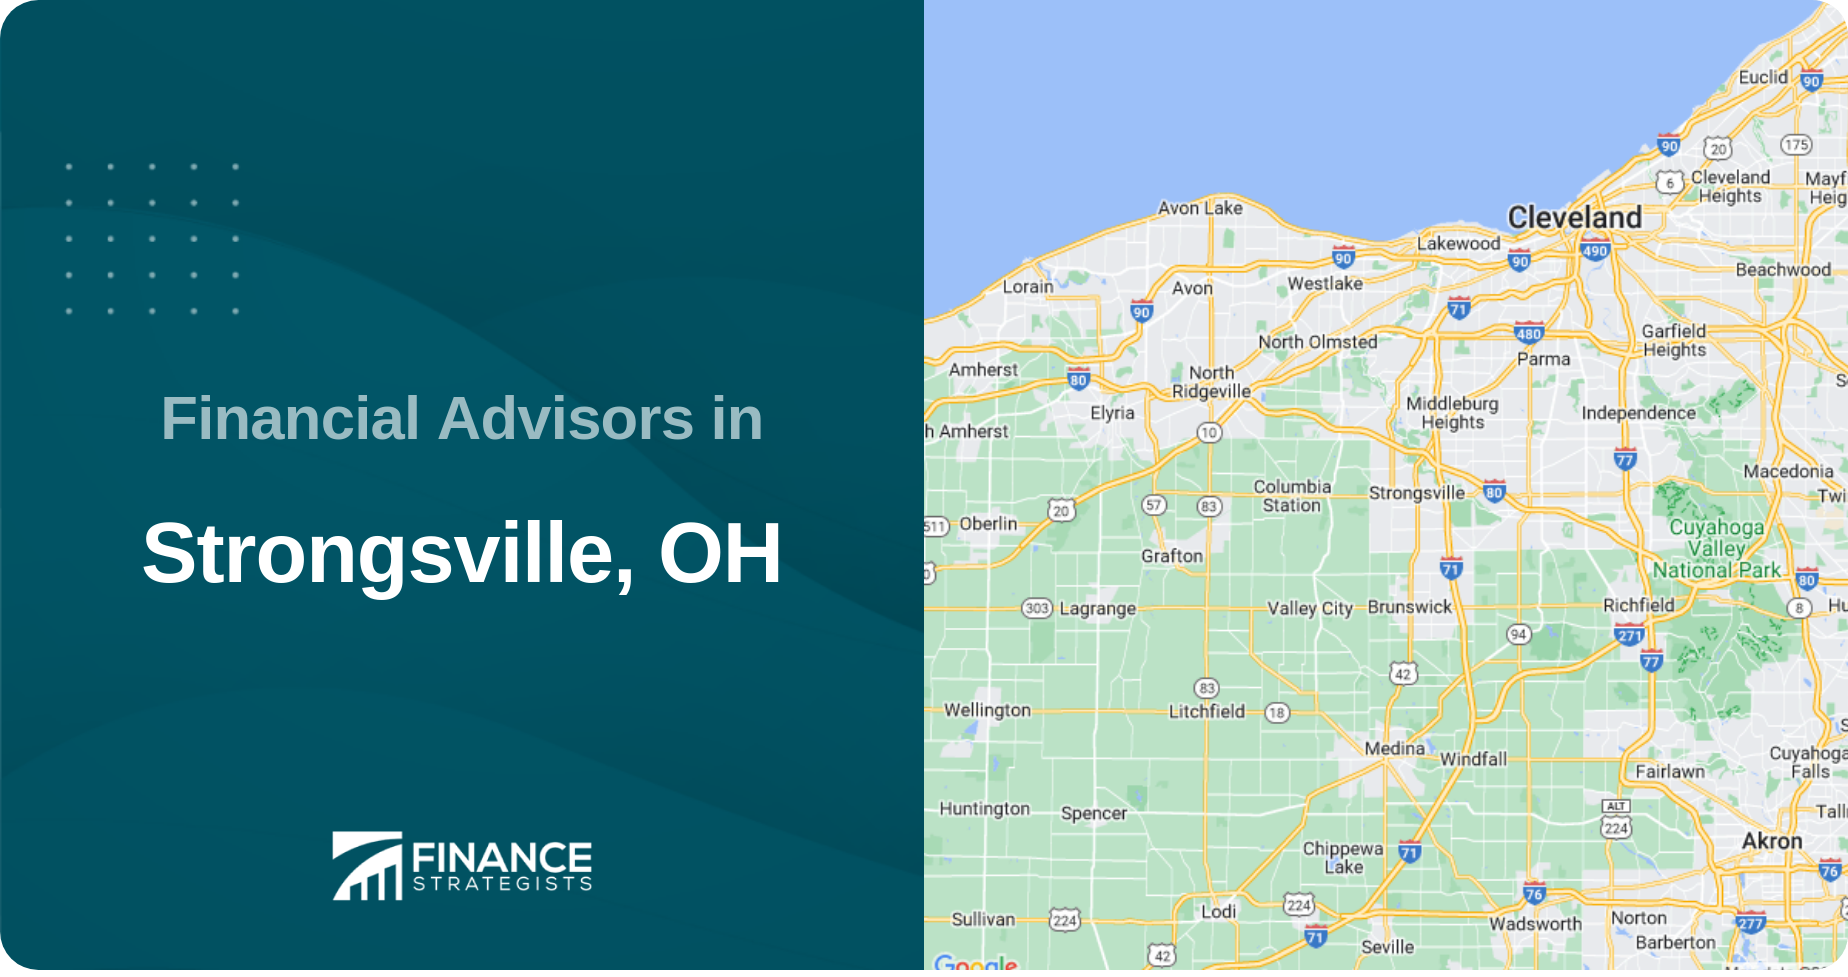 Financial Advisors in Strongsville, OH